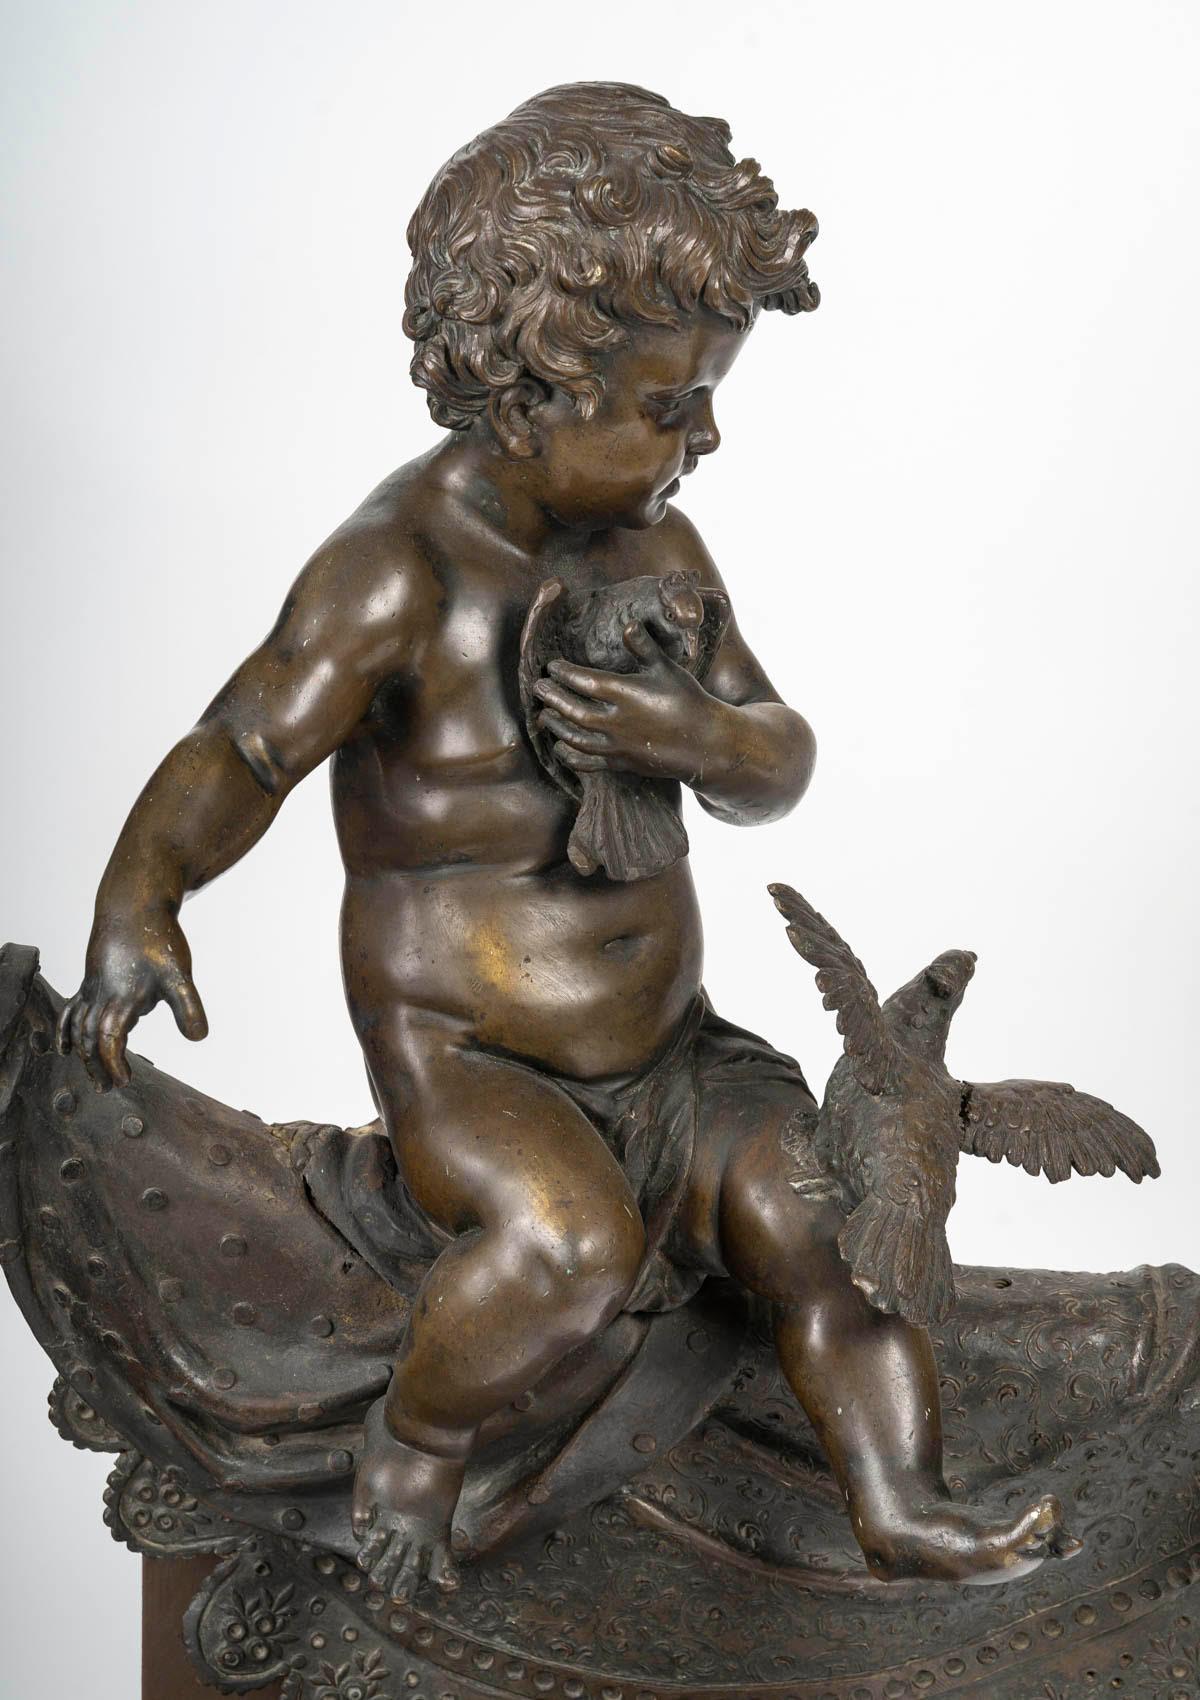 Pair of bronze sculptures, mounted on a wooden base, 19th century, Napoleon III period.

A pair of 19th century bronze sculptures, Napoleon III period, mounted on a wooden base representing 2 children with birds.
H: 66cm W: 47cm D: 23cm